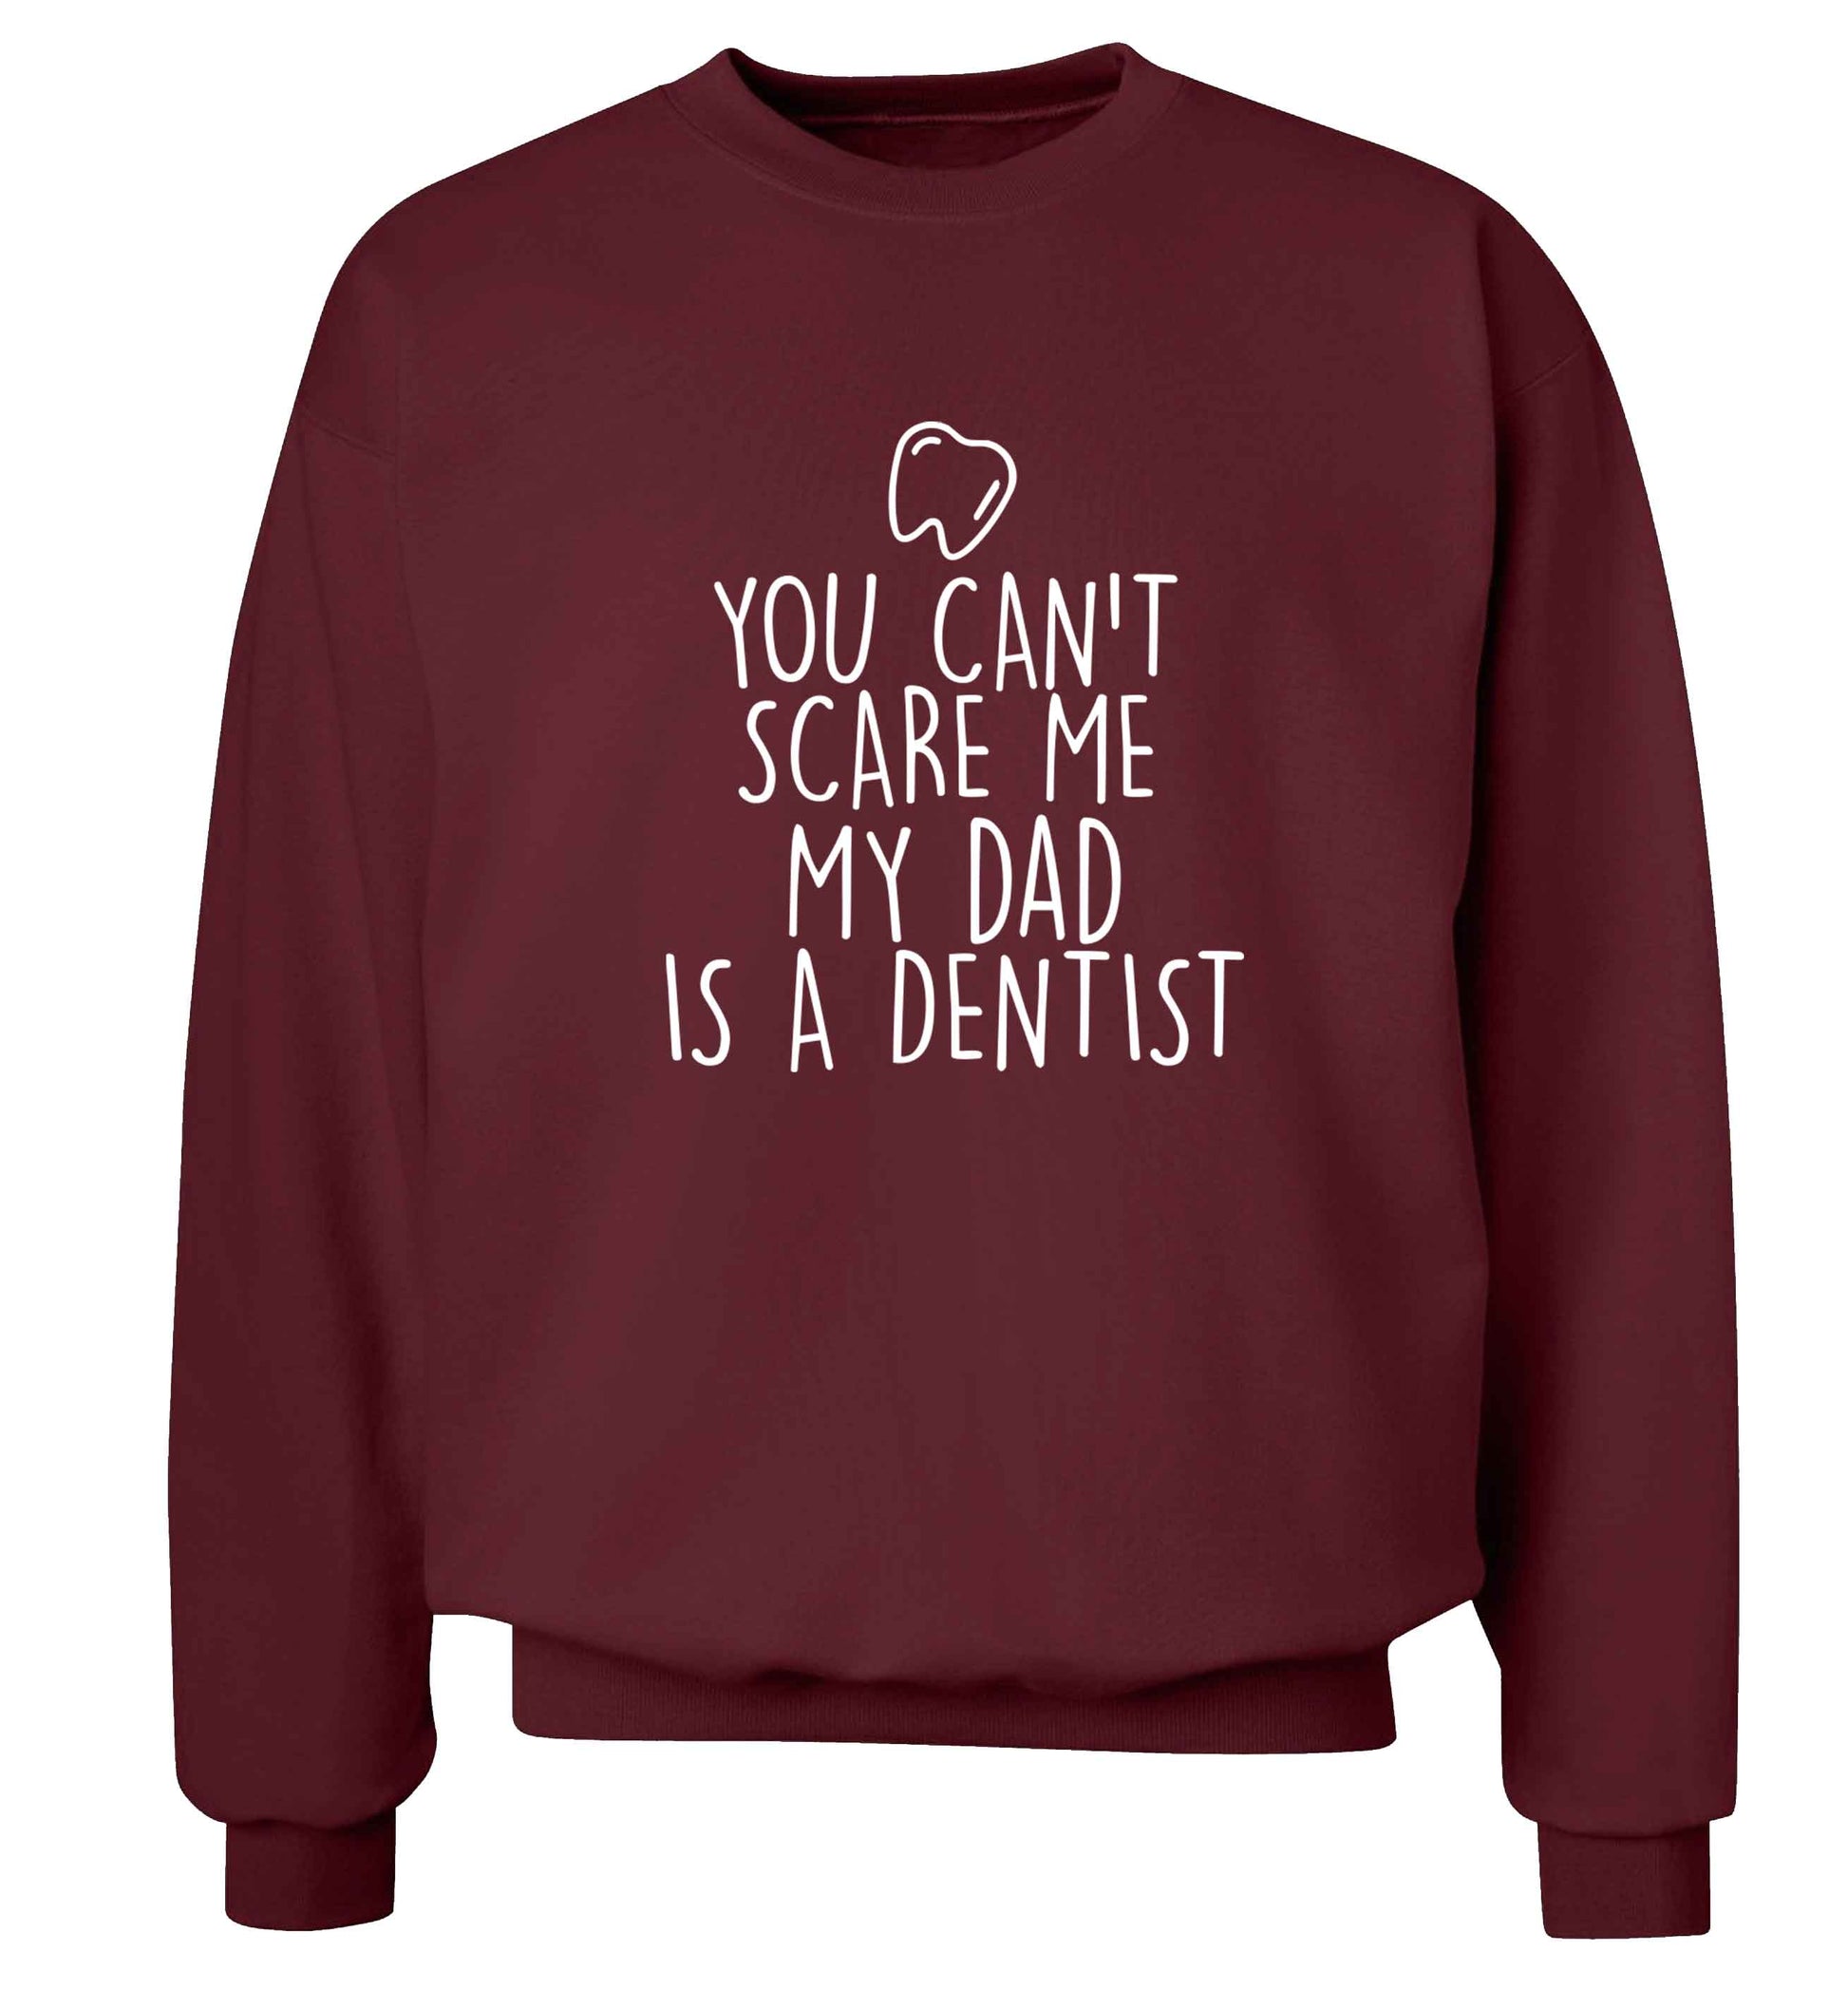 You can't scare me my dad is a dentist adult's unisex maroon sweater 2XL